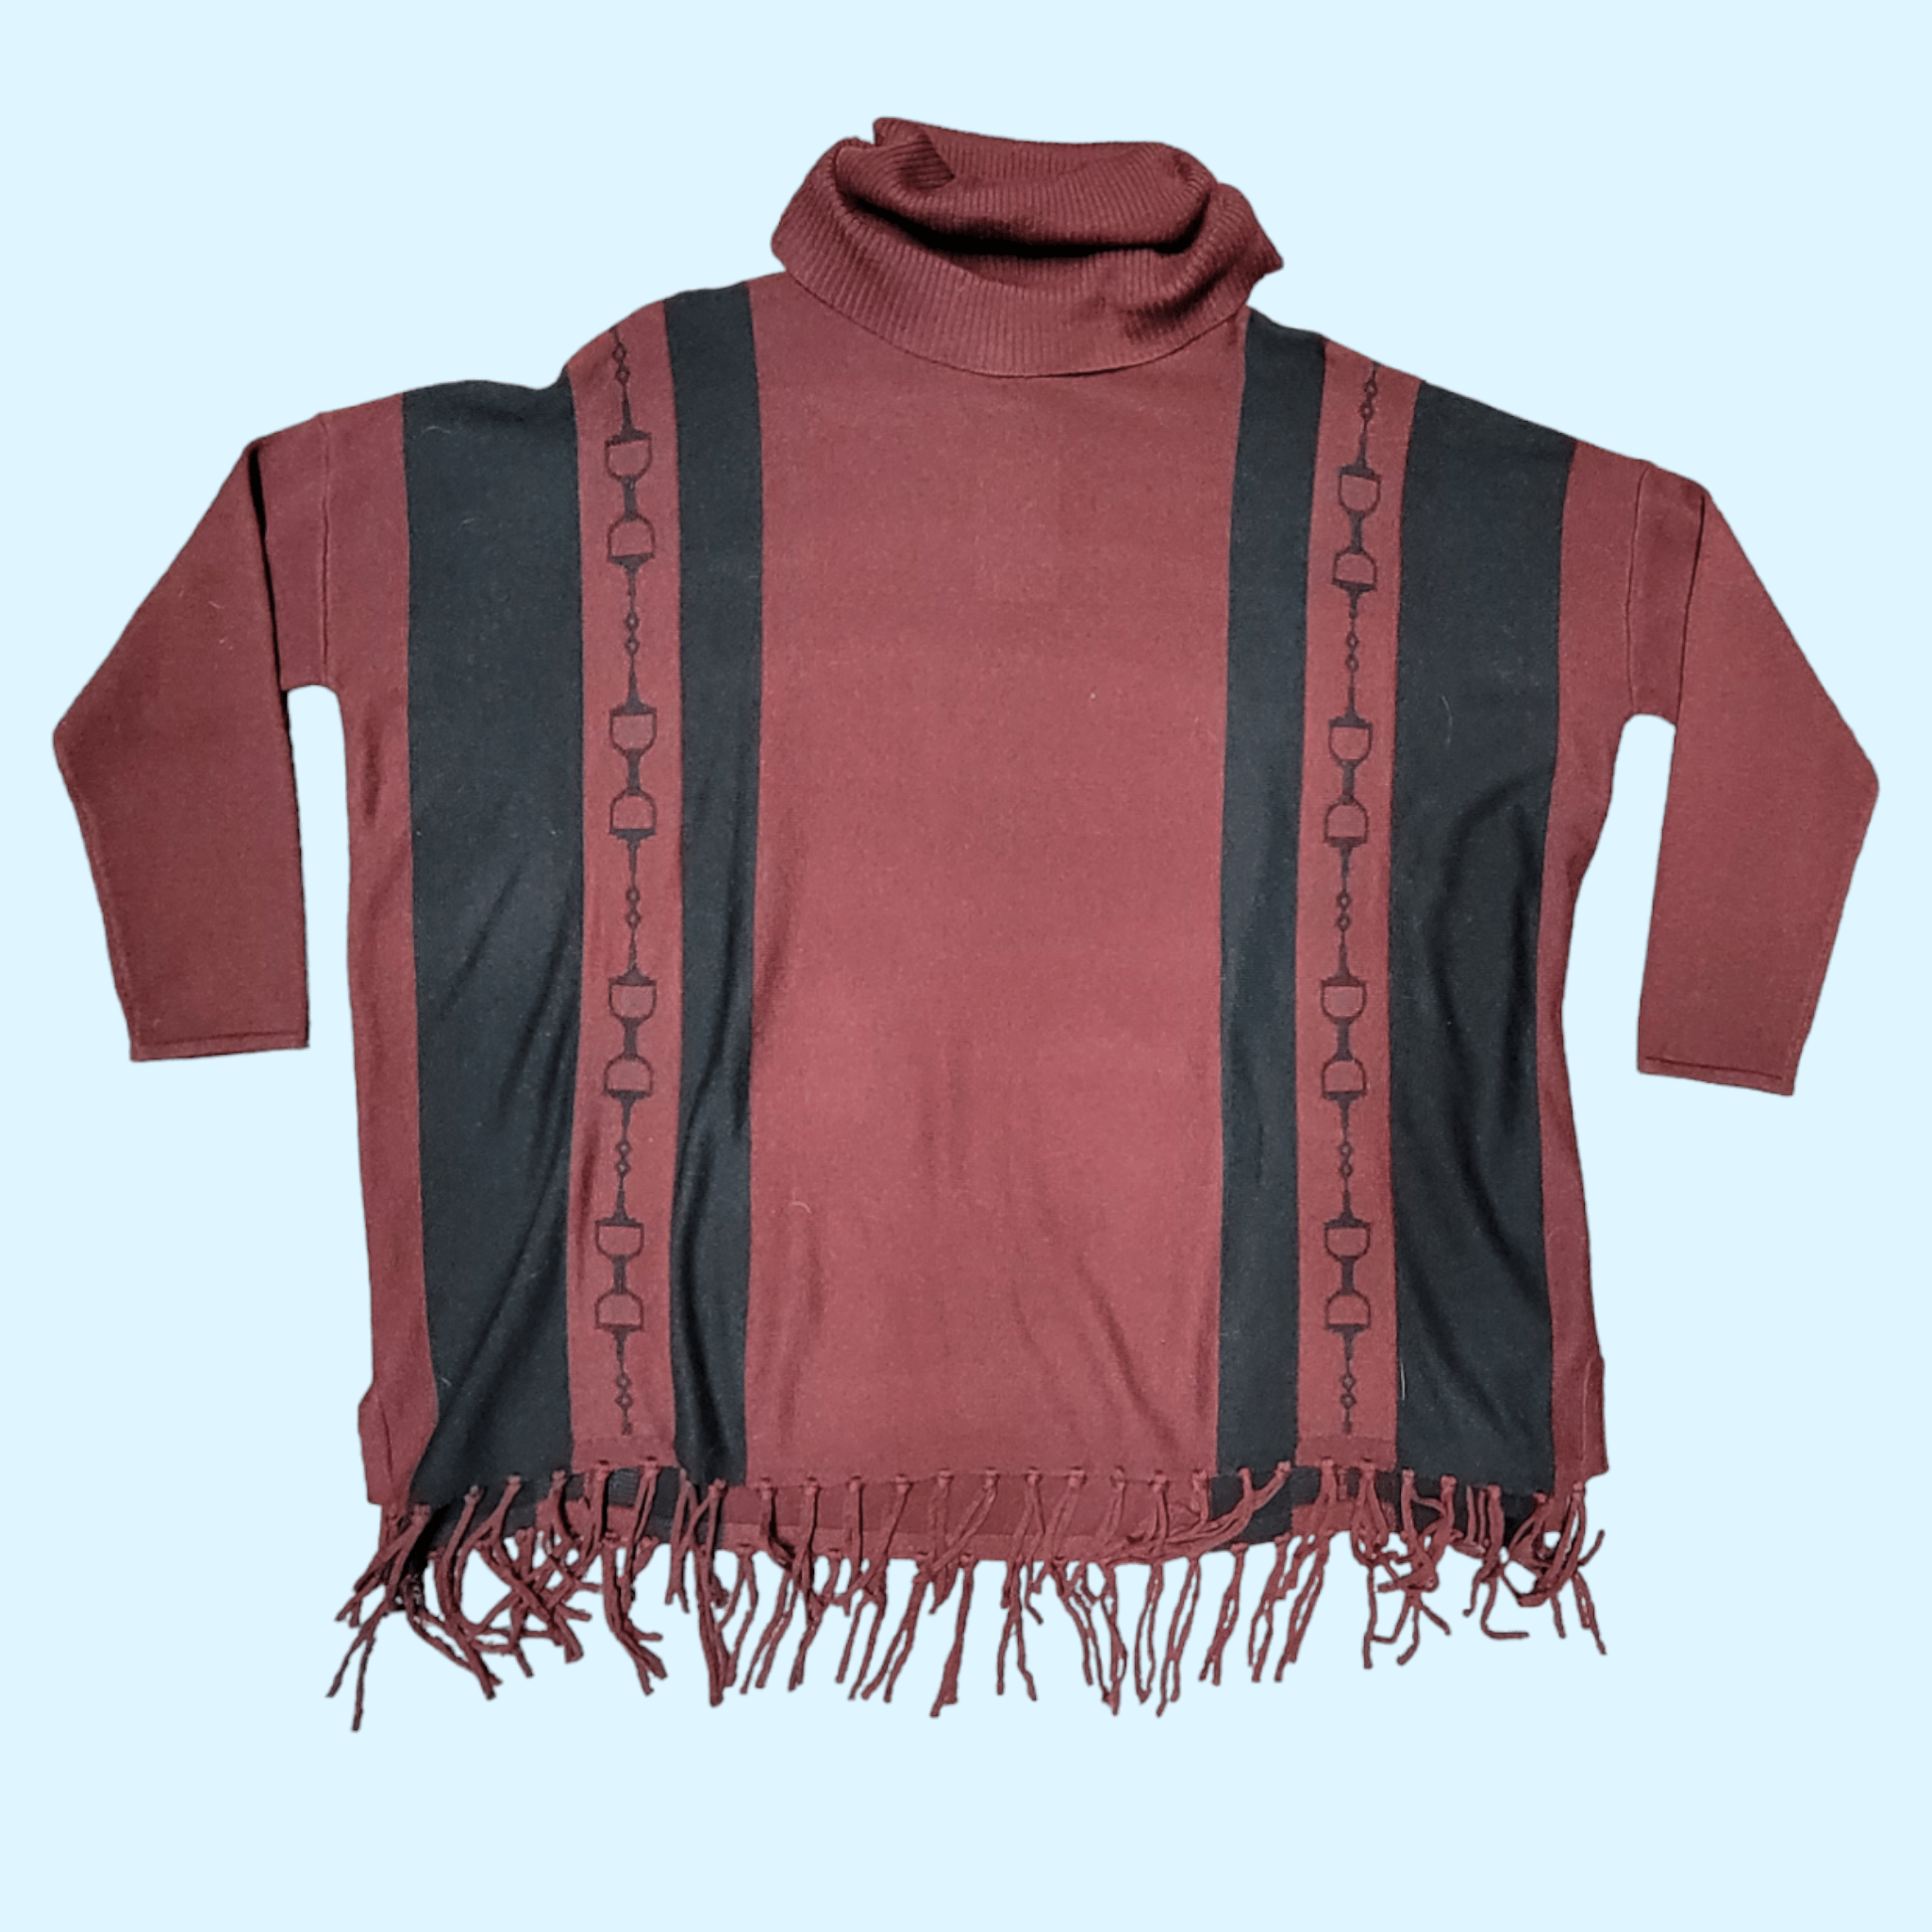 EQL By Kerrits Turtleneck Poncho in Burgundy - Small/Medium NWT - Equine Exchange Tack Shop